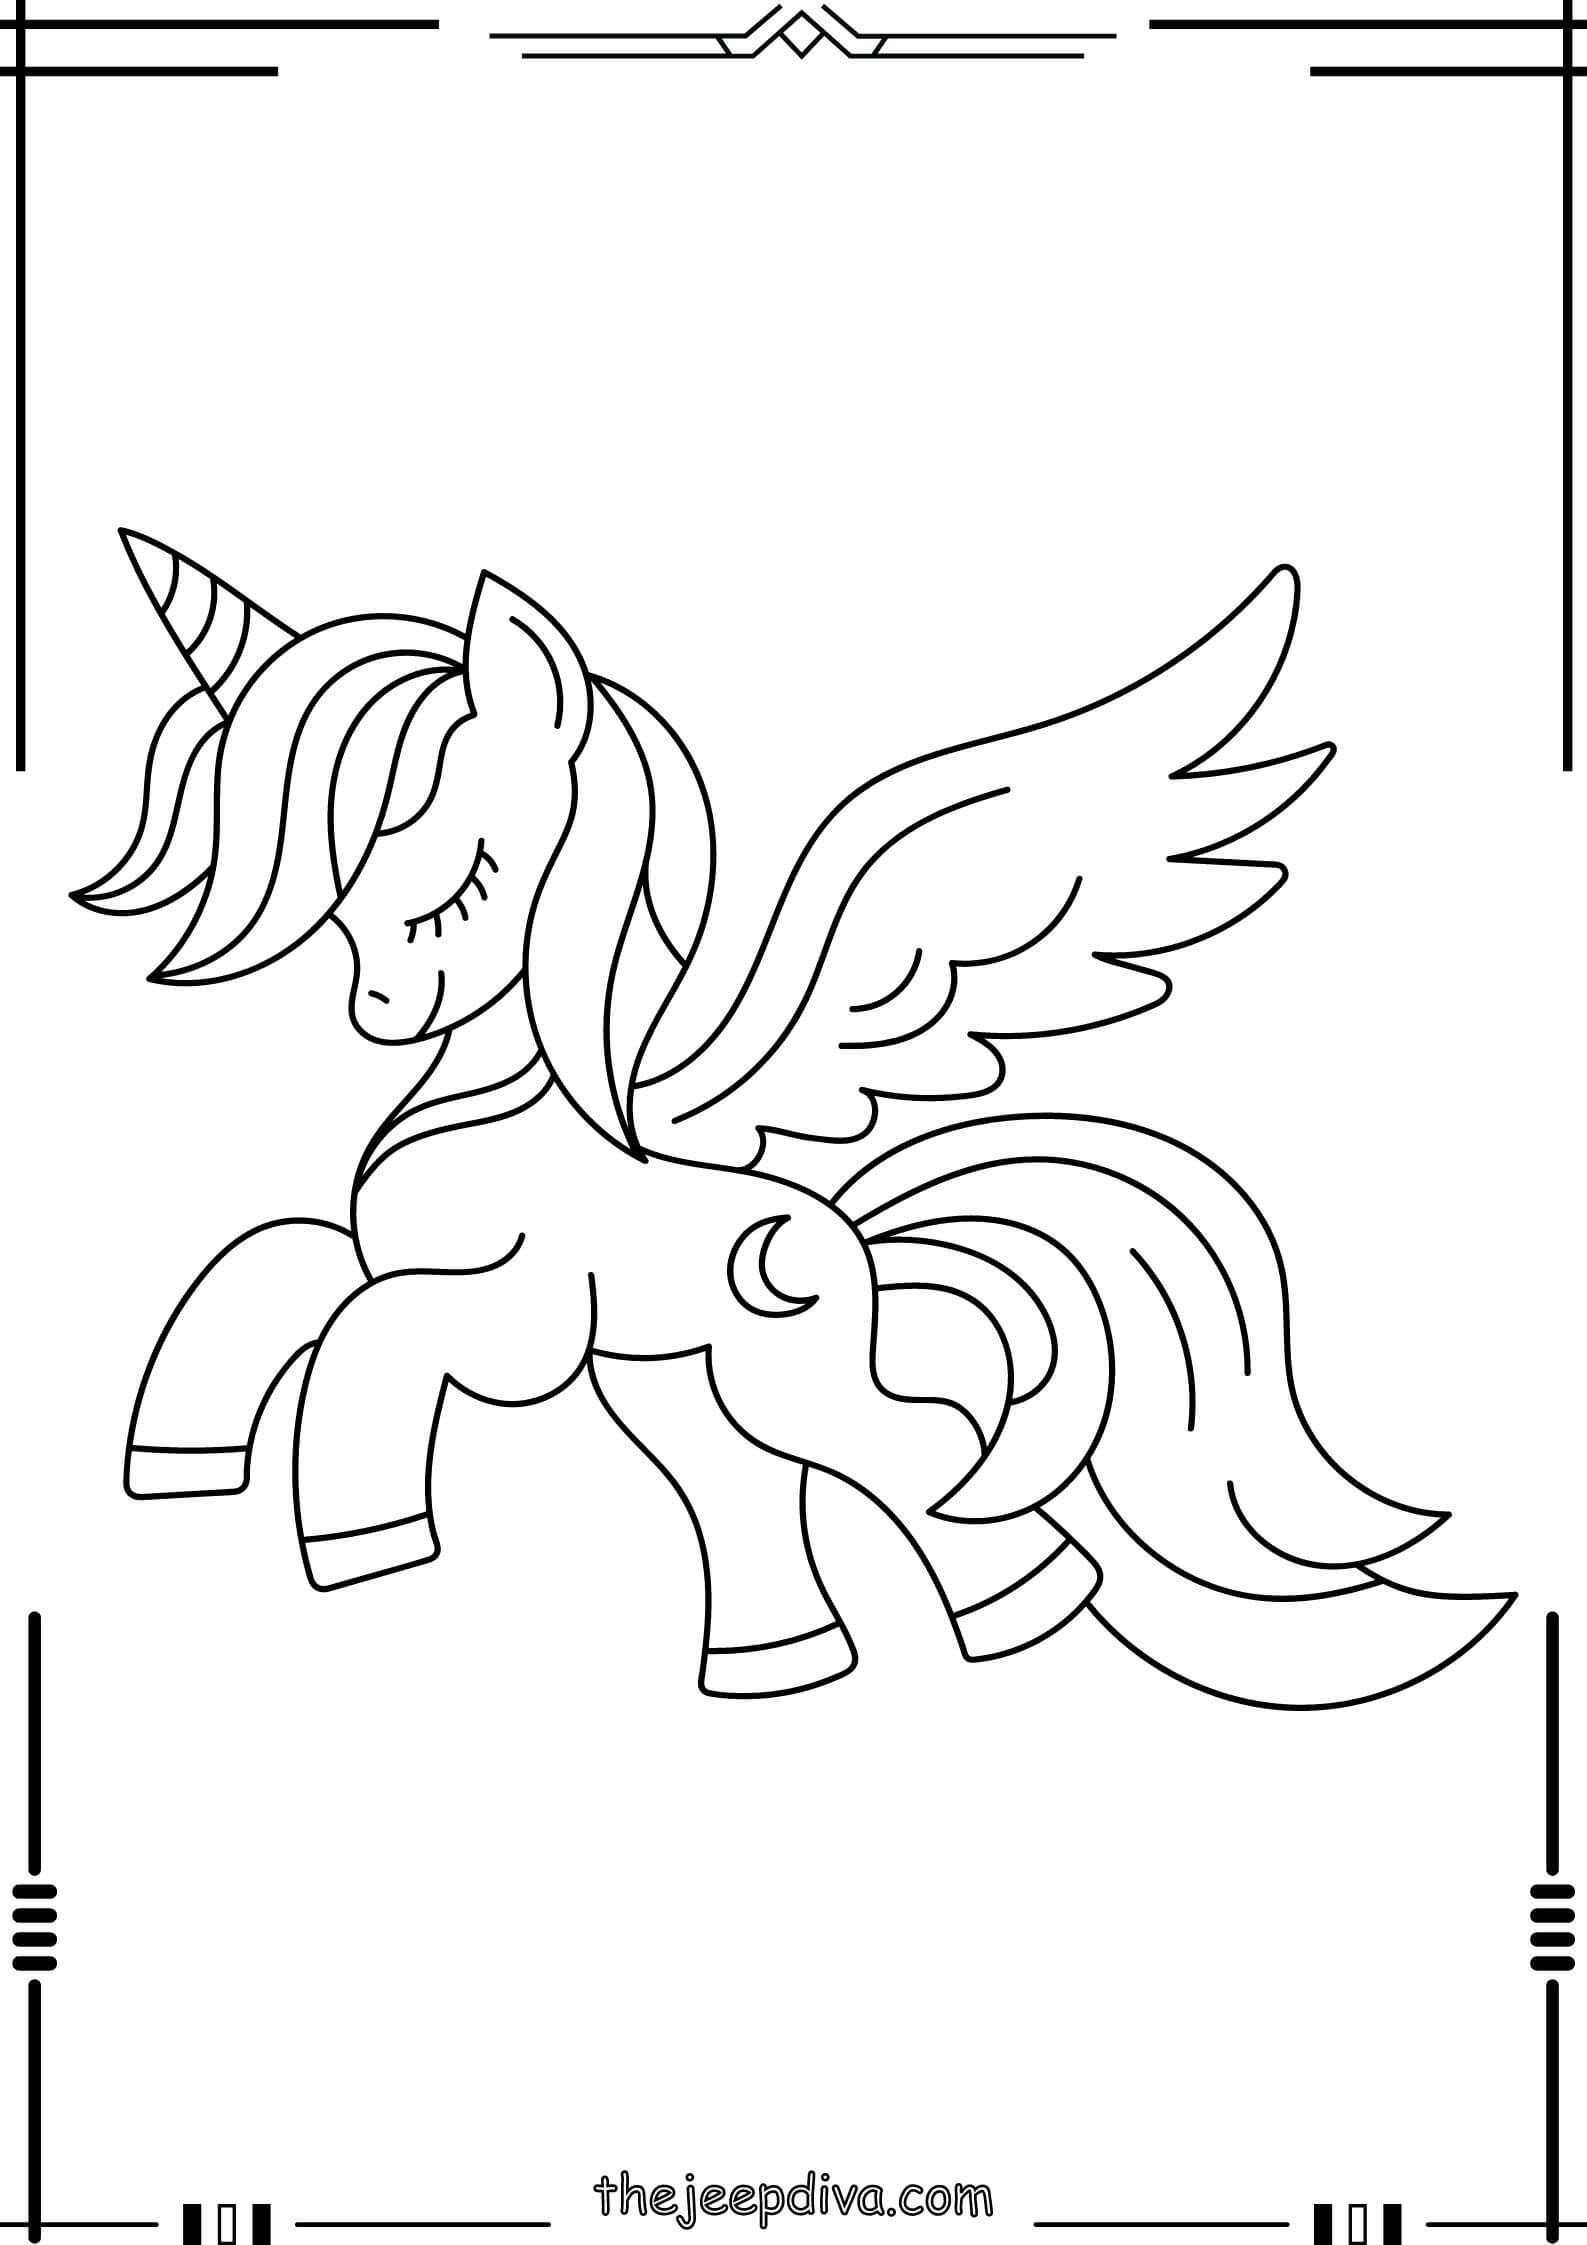 unicorn-coloring-page-easy-11